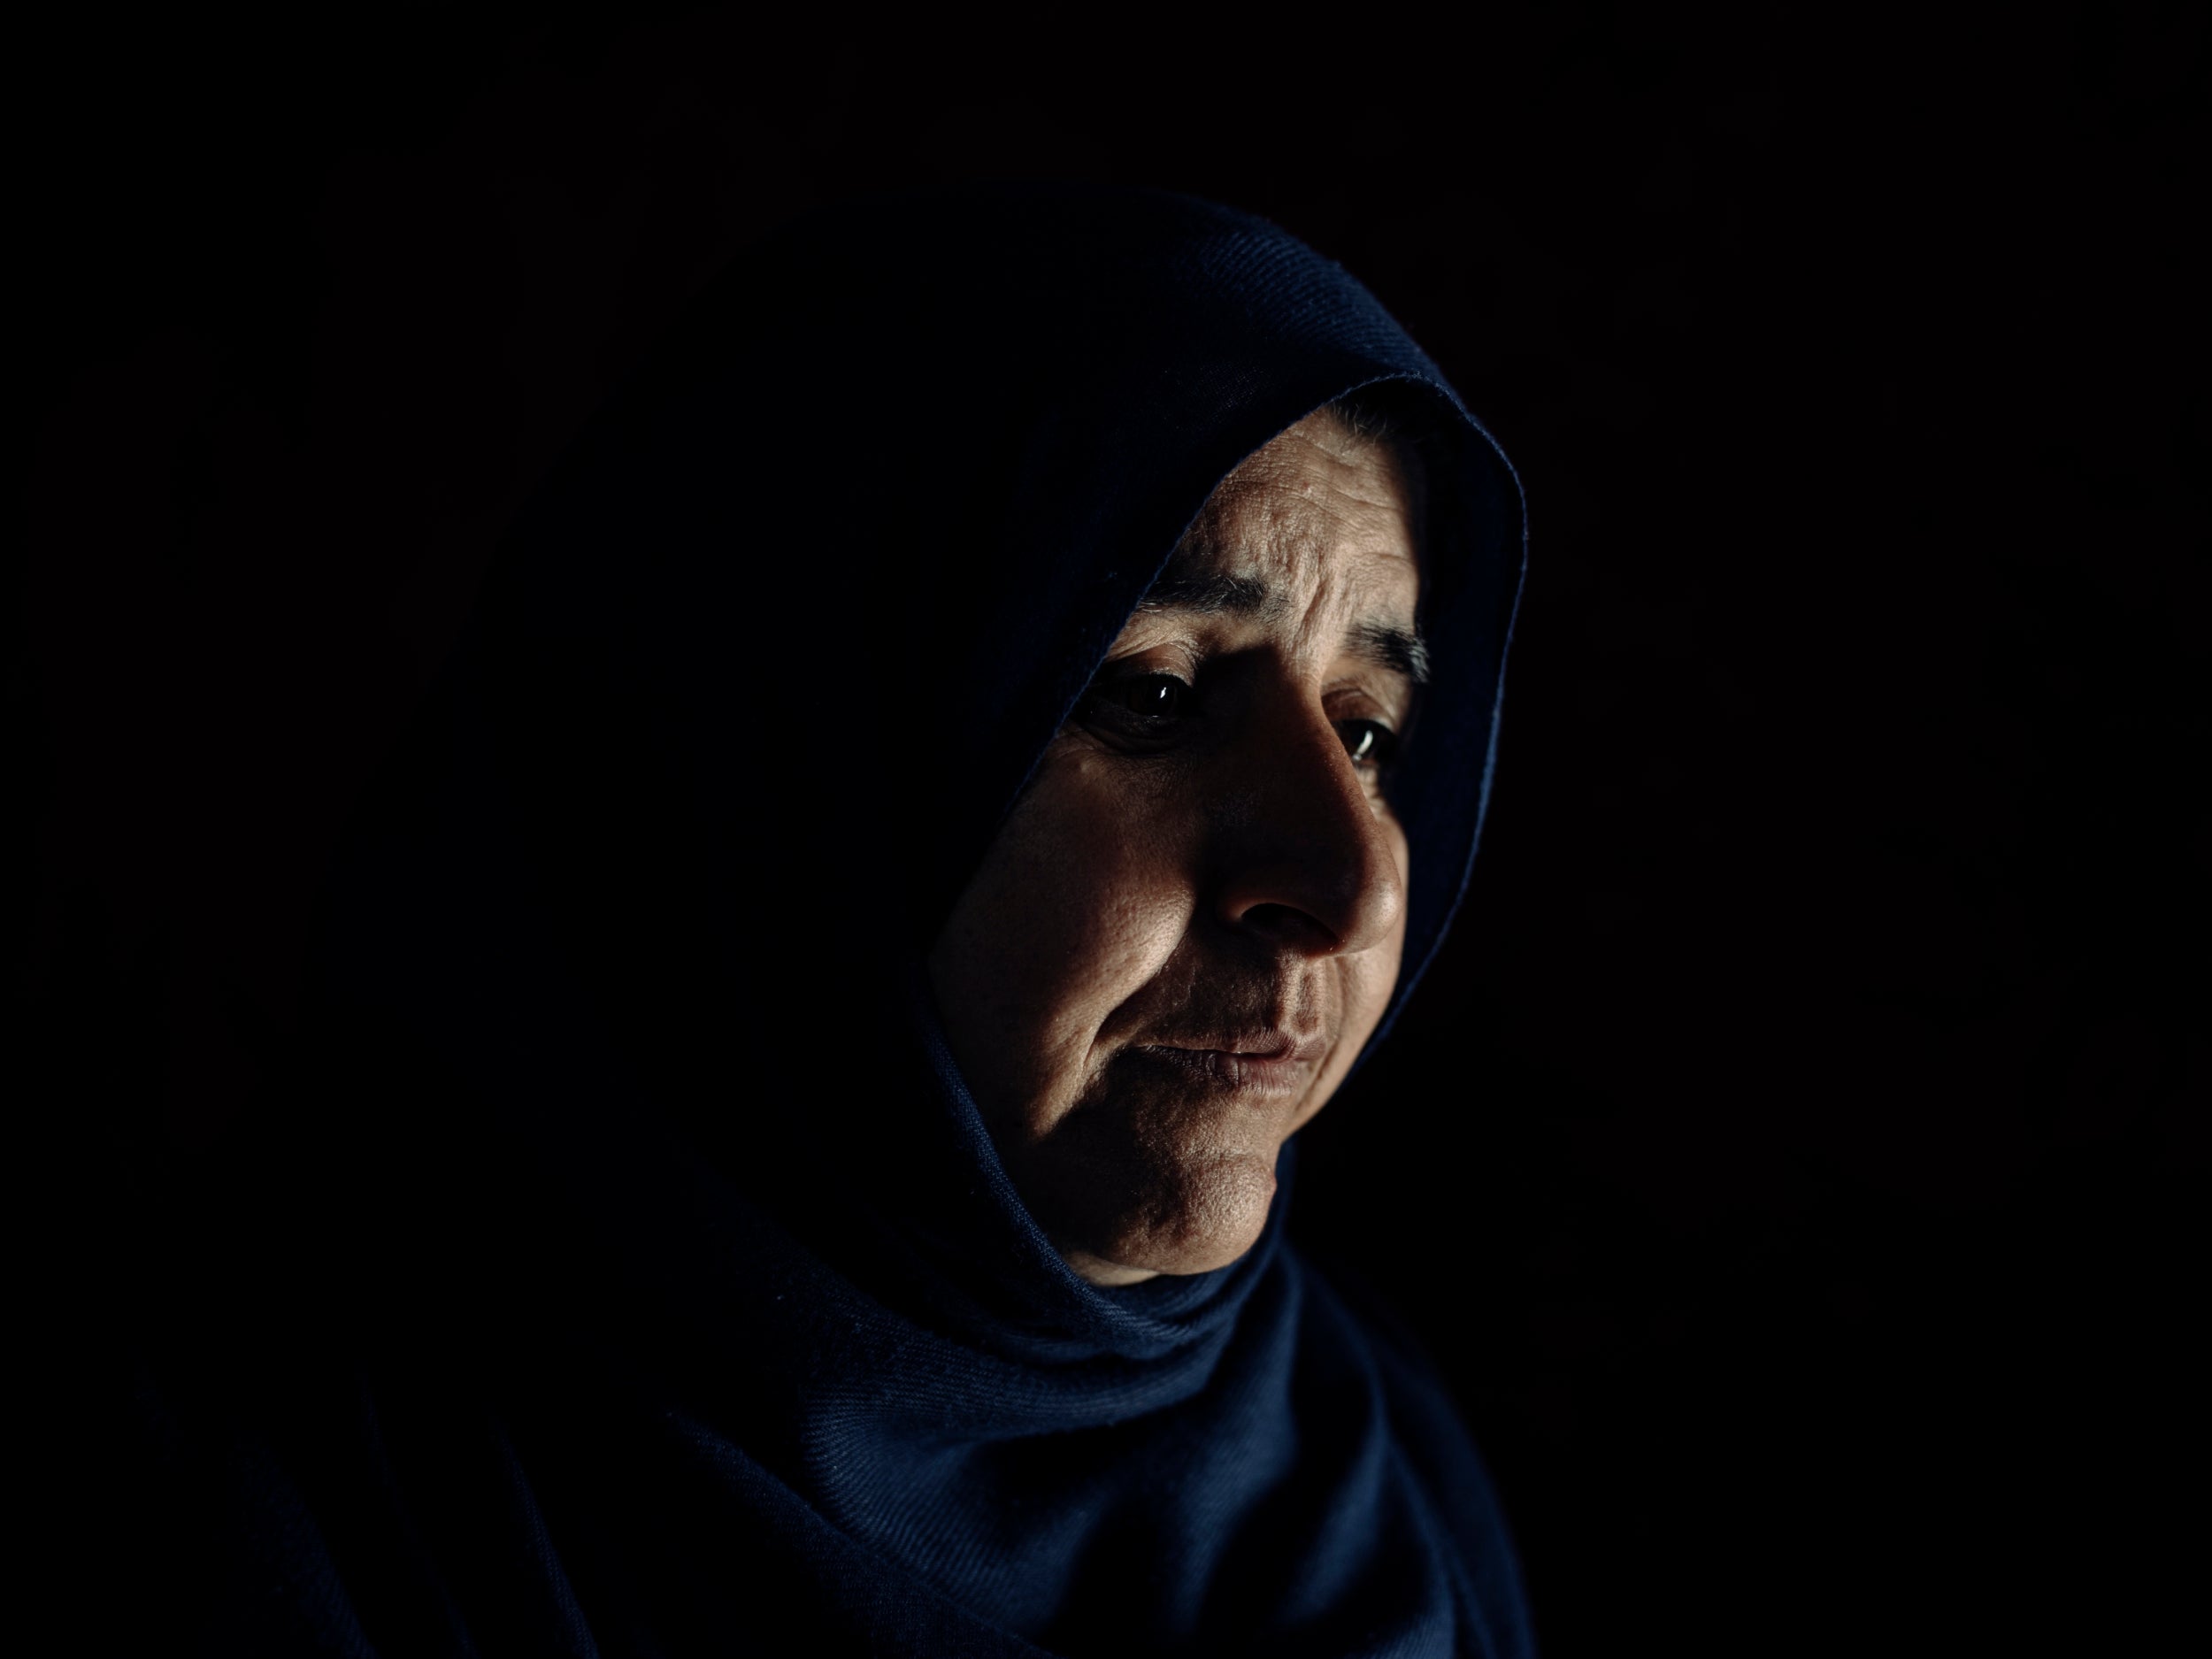 Hanan fled Syria in 2013 after air attacks shelled the rear of her house